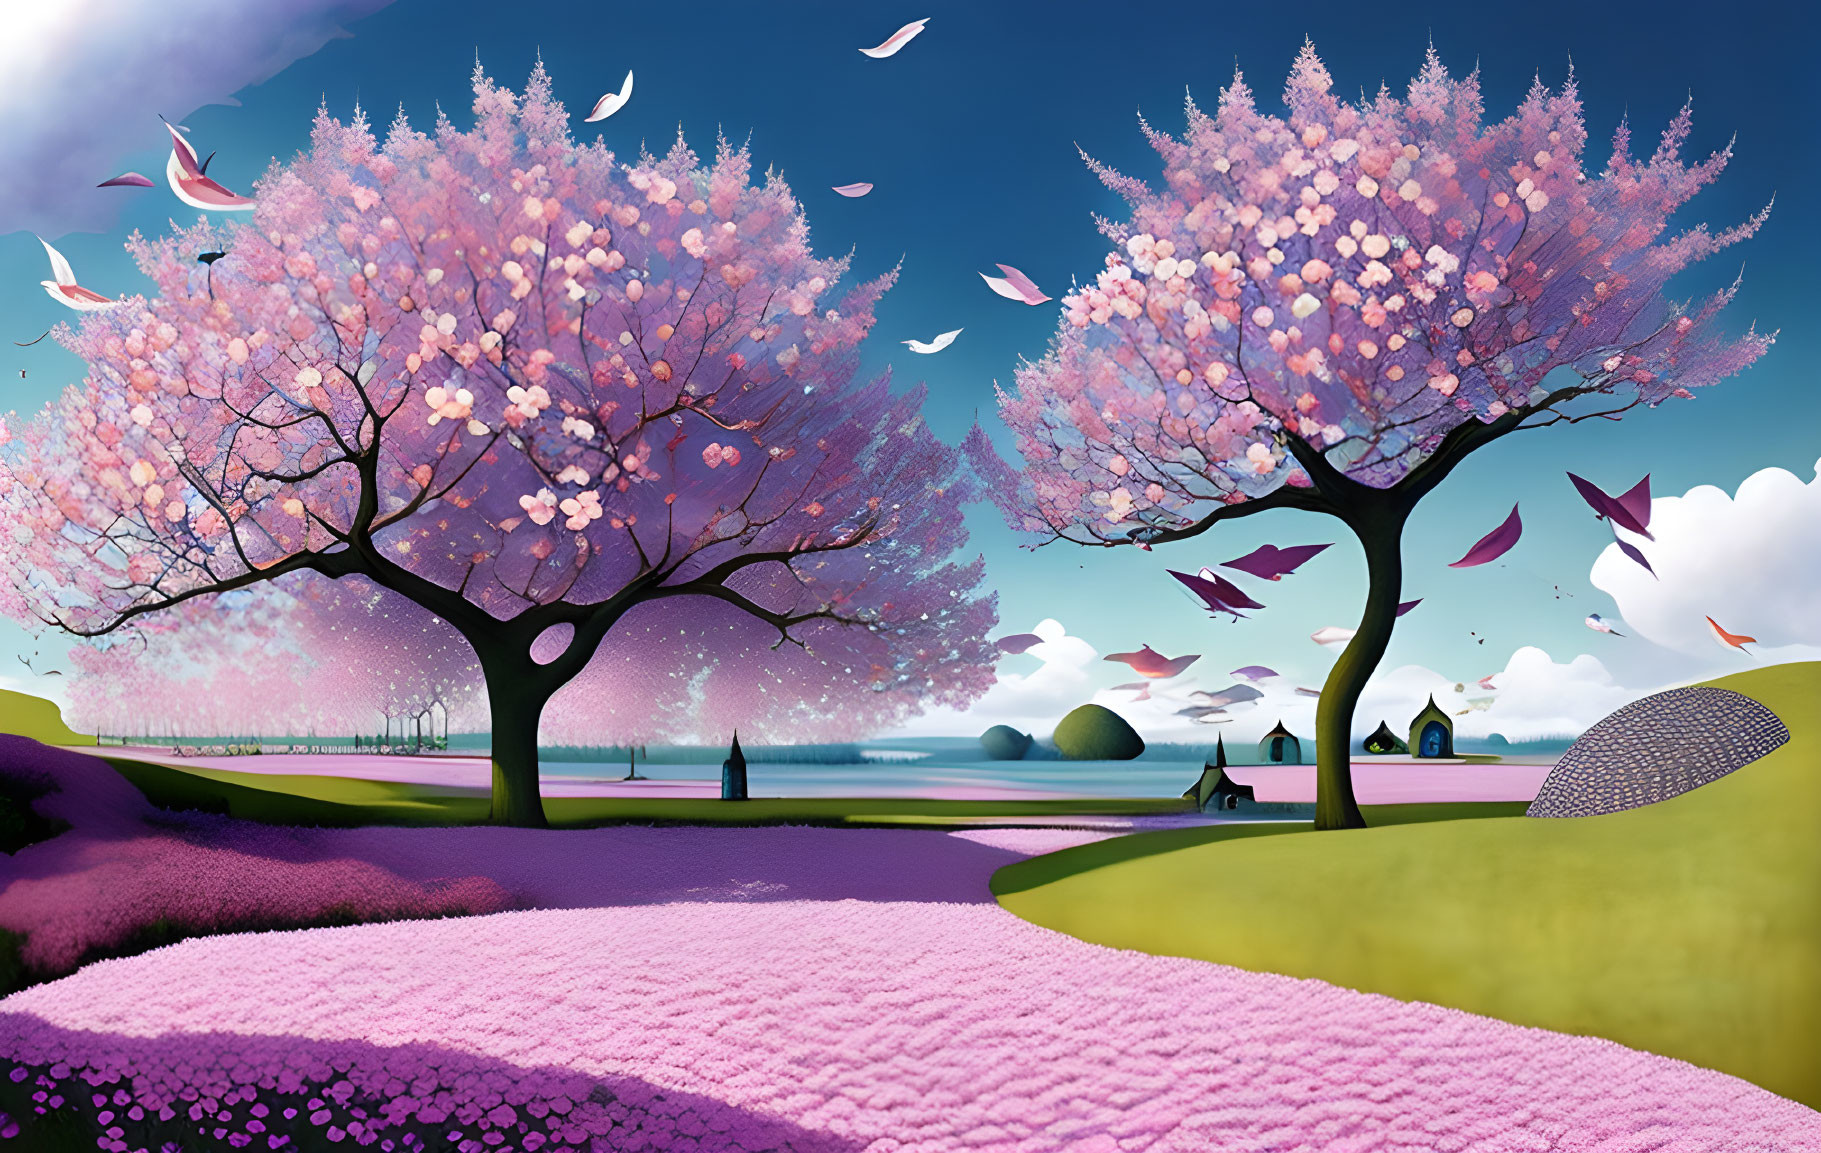 Vibrant landscape with pink cherry blossom trees and purple flower fields